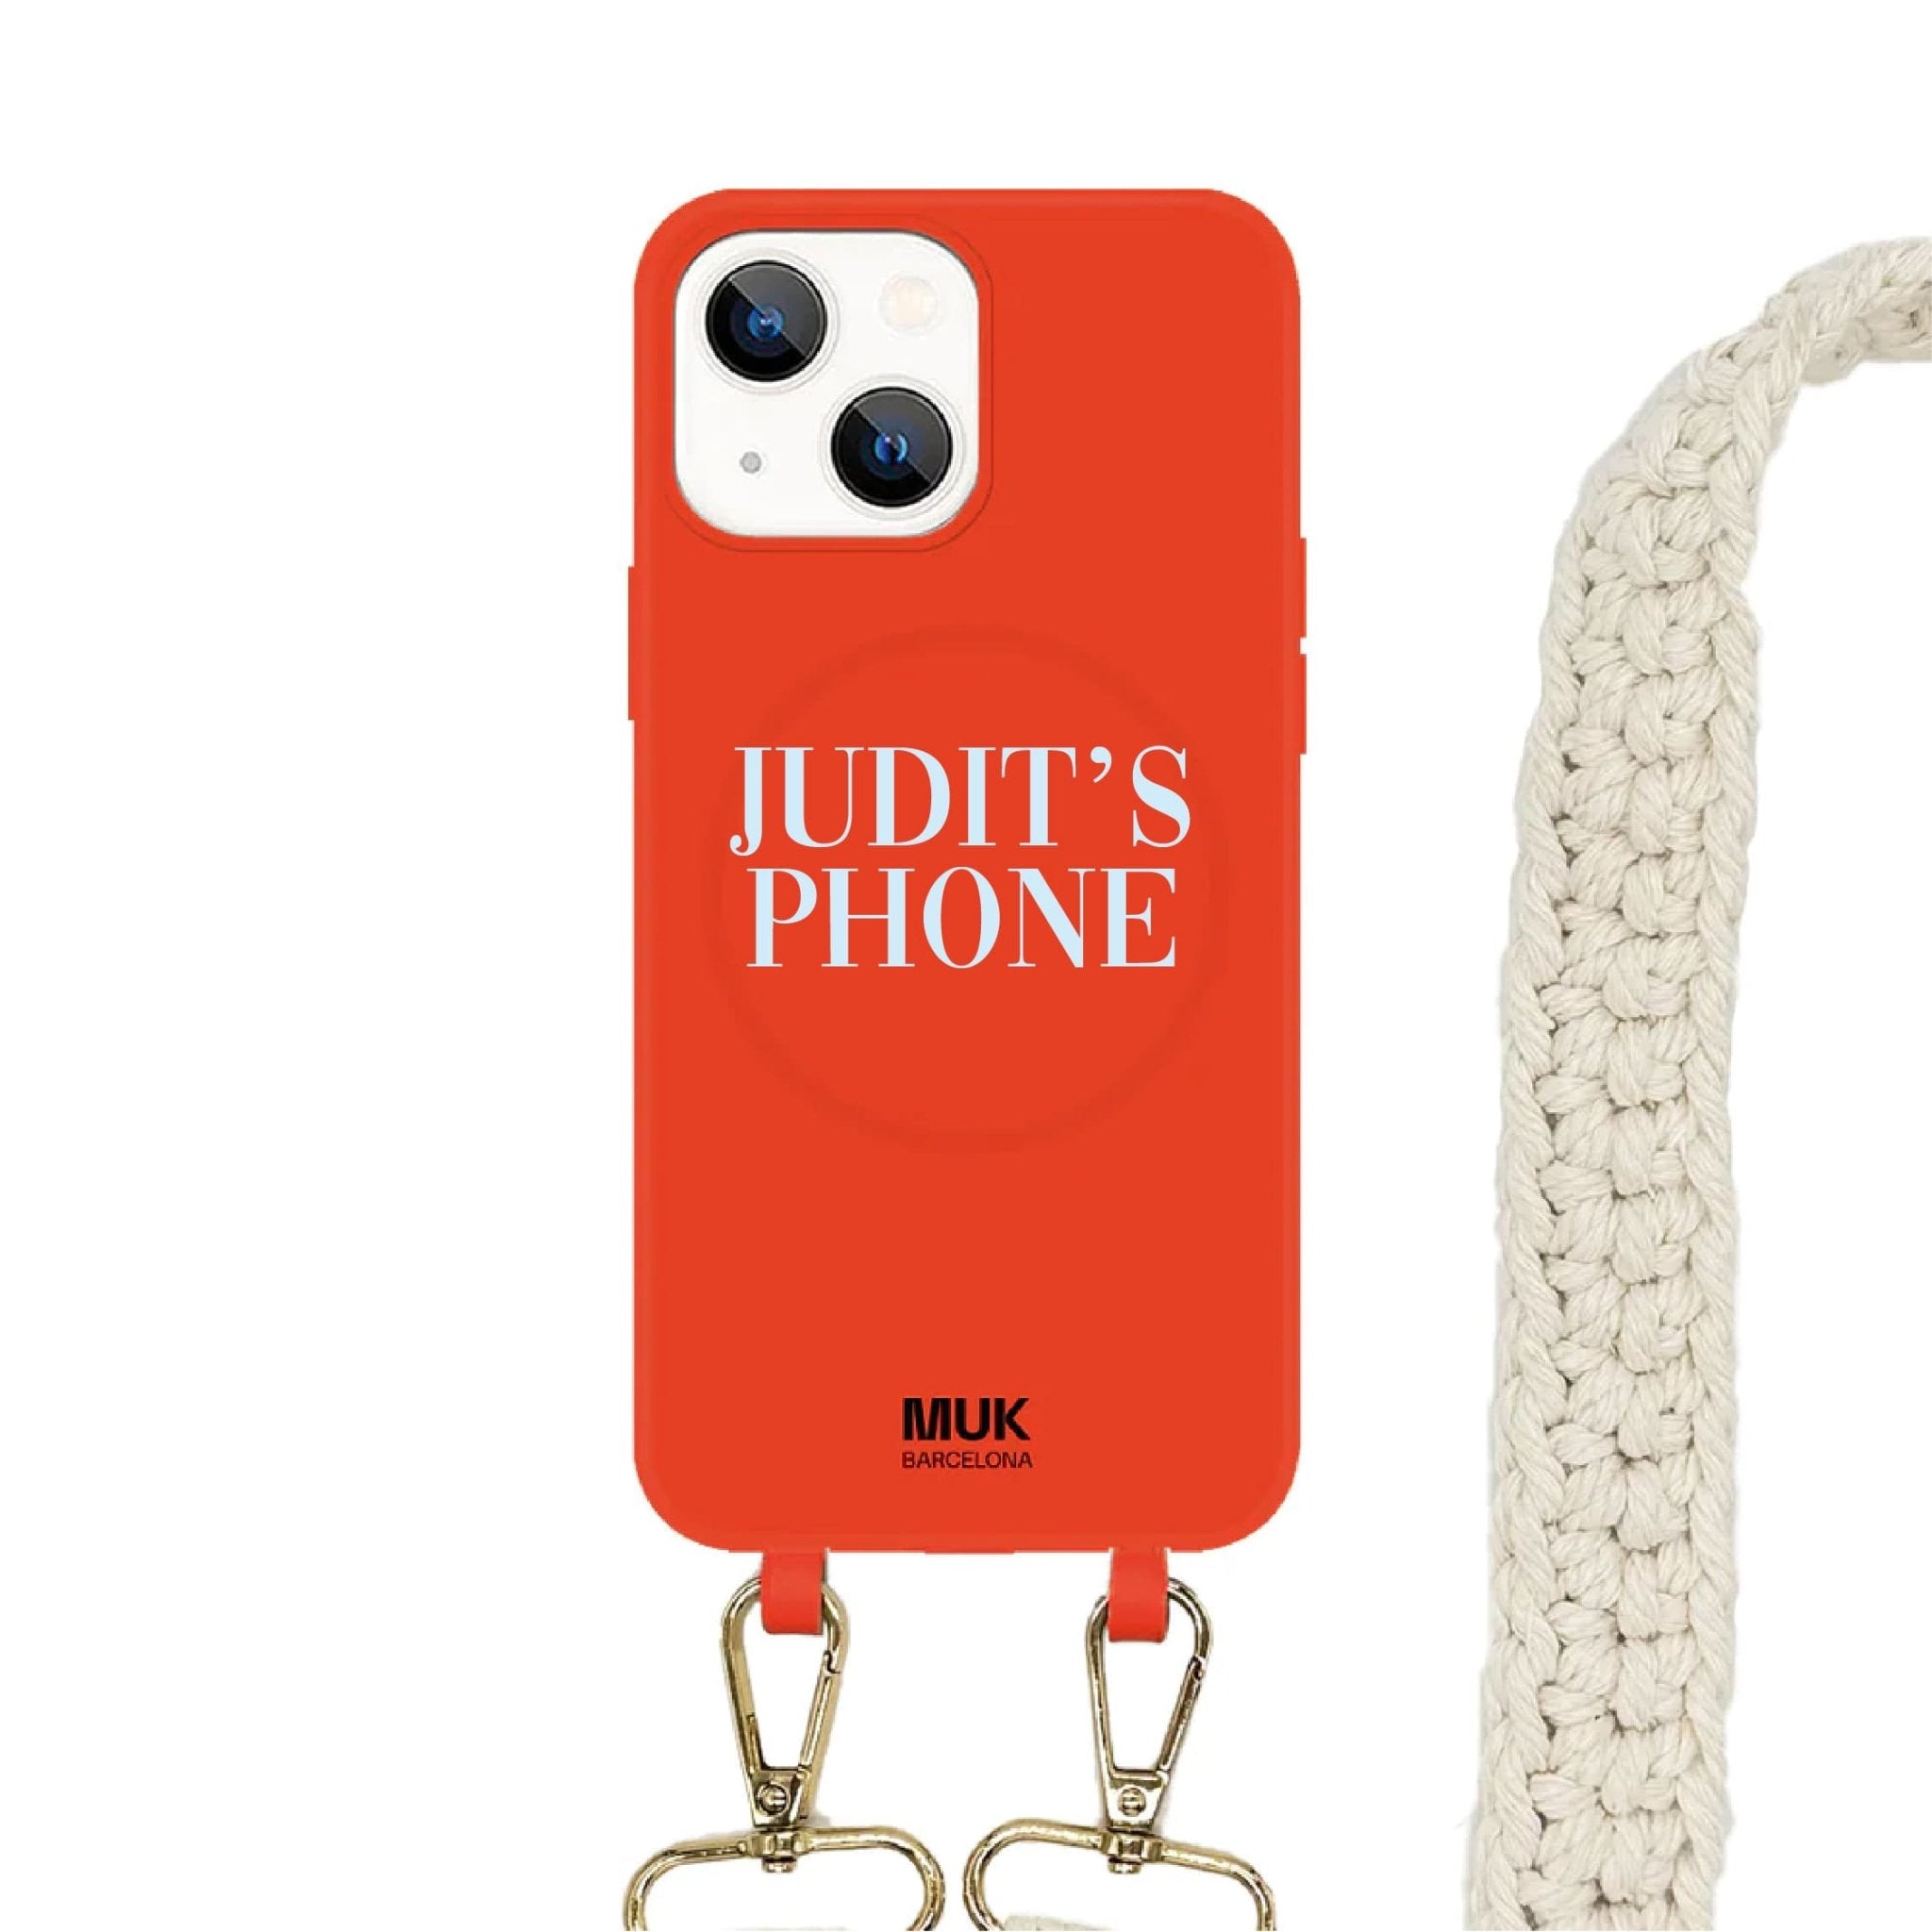 Teja Phone Case with a design on it
